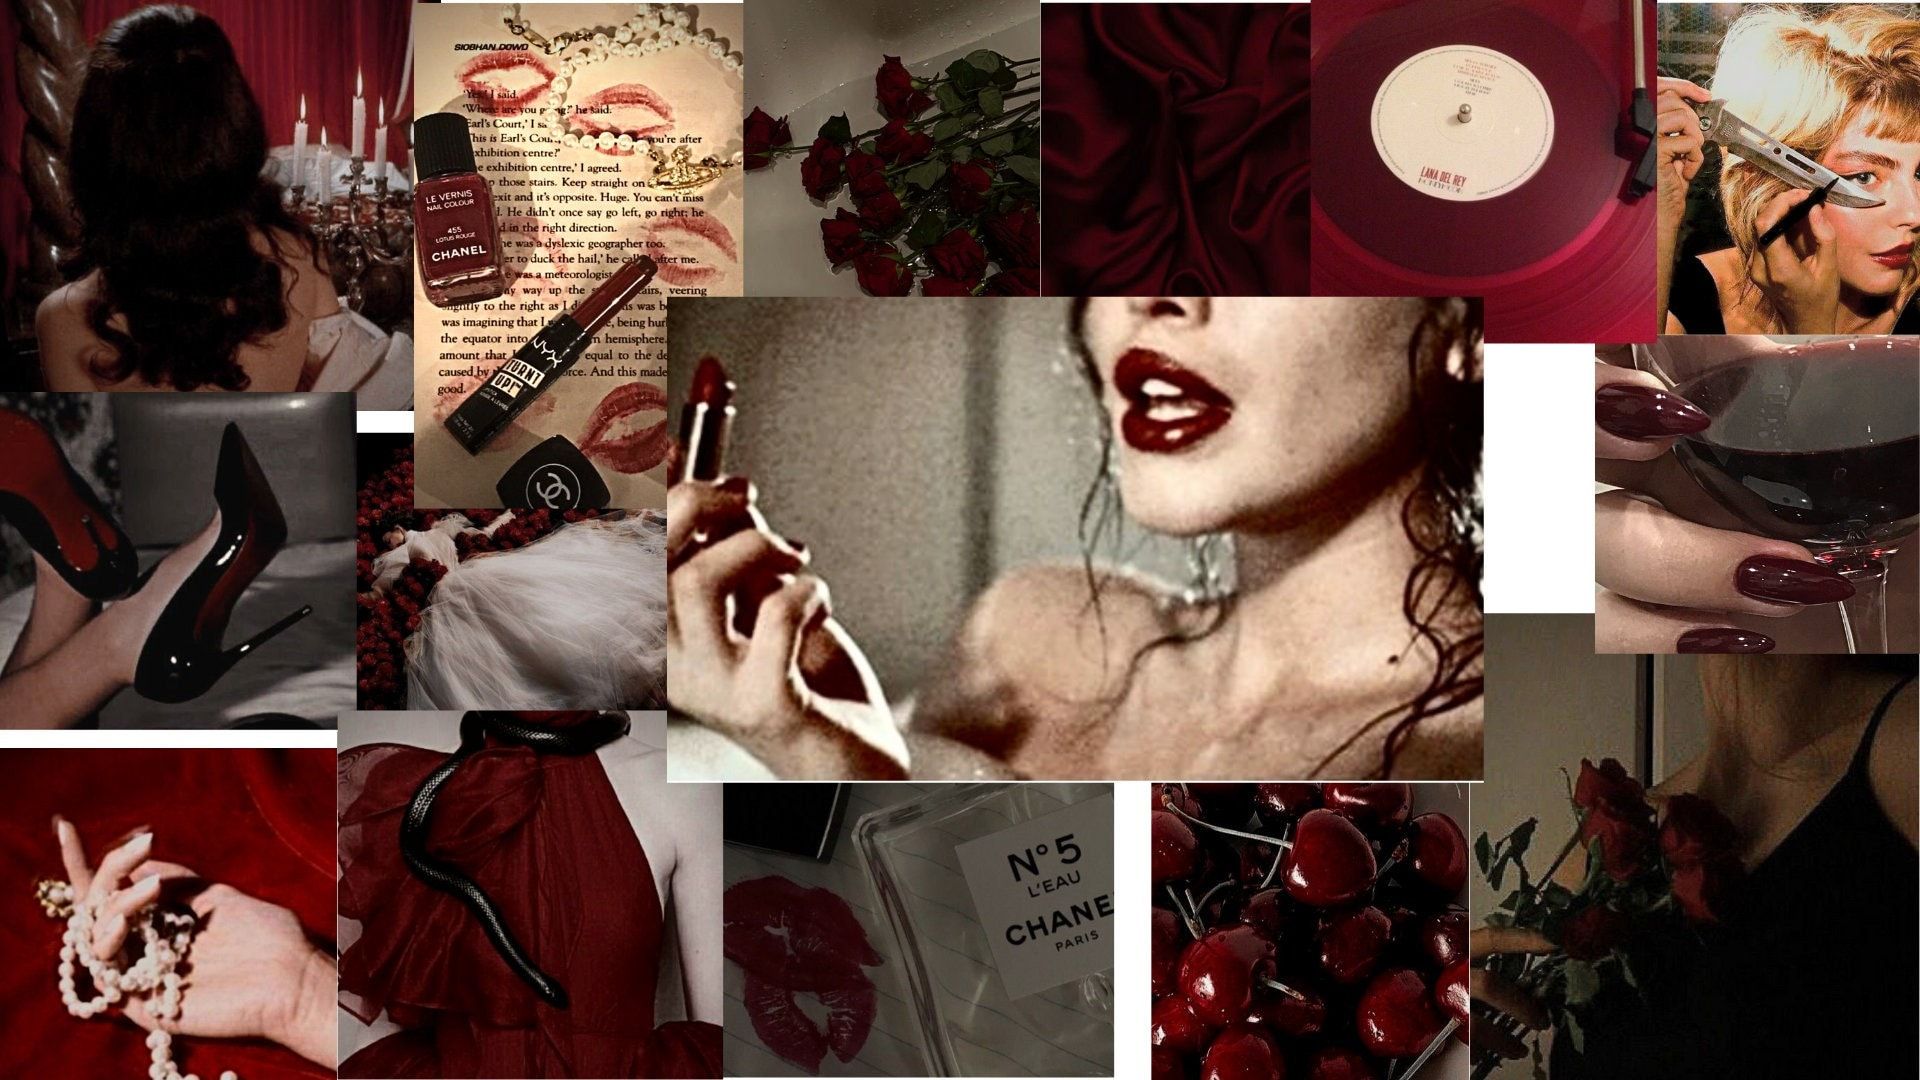  Feminin Hintergrundbild 1920x1080. Red Aesthetic Posters / Red Collage / Red Posters / Femme